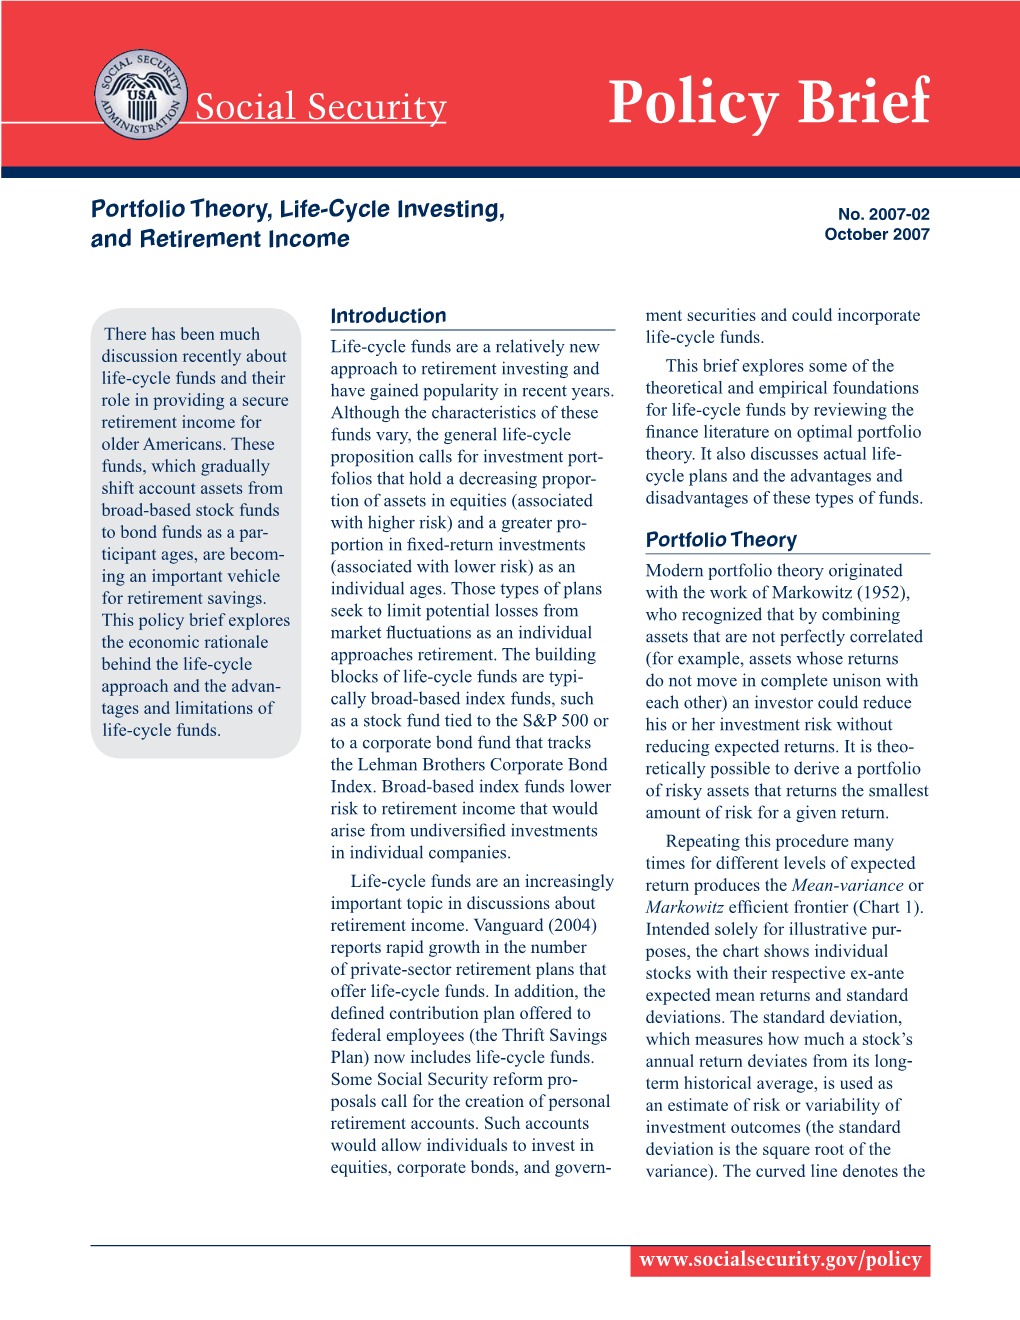 Portfolio Theory, Life-Cycle Investing, and Retirement Income